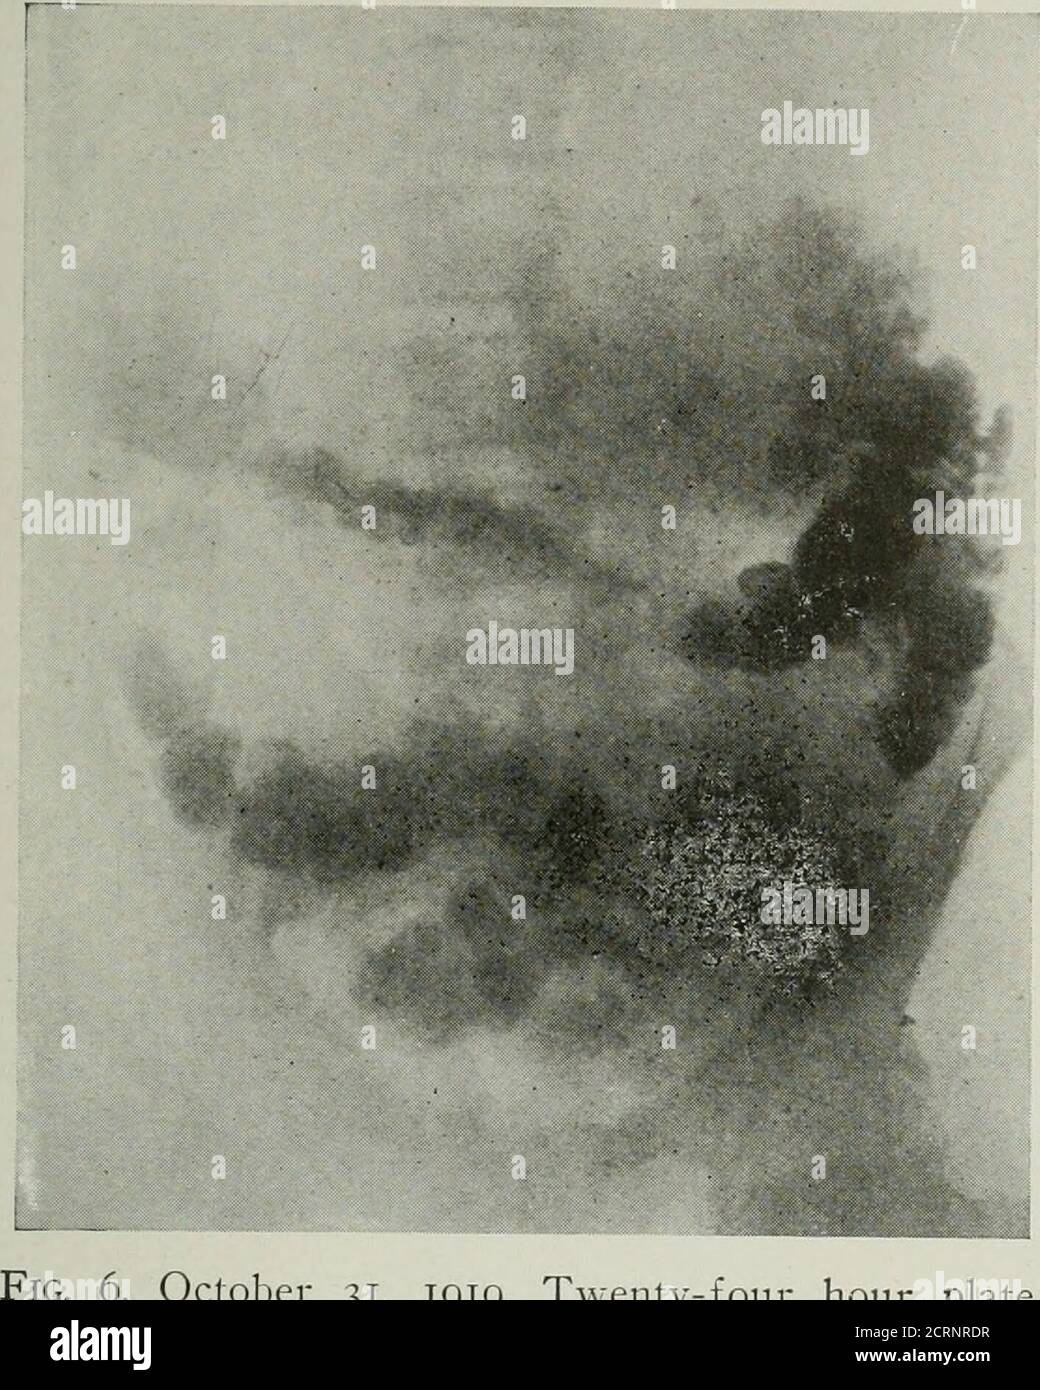 . The American journal of roentgenology, radium therapy and nuclear medicine . FiG. 5. October 30, 1919. Anterior-posterior view,showing gastro-enterostomy. practically twice the size. At the same timea quantity of the barium mixture was ob-served spreading out through the gastricarea and assuming the gastric shape and Gastrocolic Fistula 519 appearance of rugae. A plate was made im-mediately which confirmed this observation.The opening from the colon to the stomach. 6. October 31, 1919. Twenty-four hour plate. Three days later, after a thorough ca-tharsis and preliminary cleansing enema, theb Stock Photo